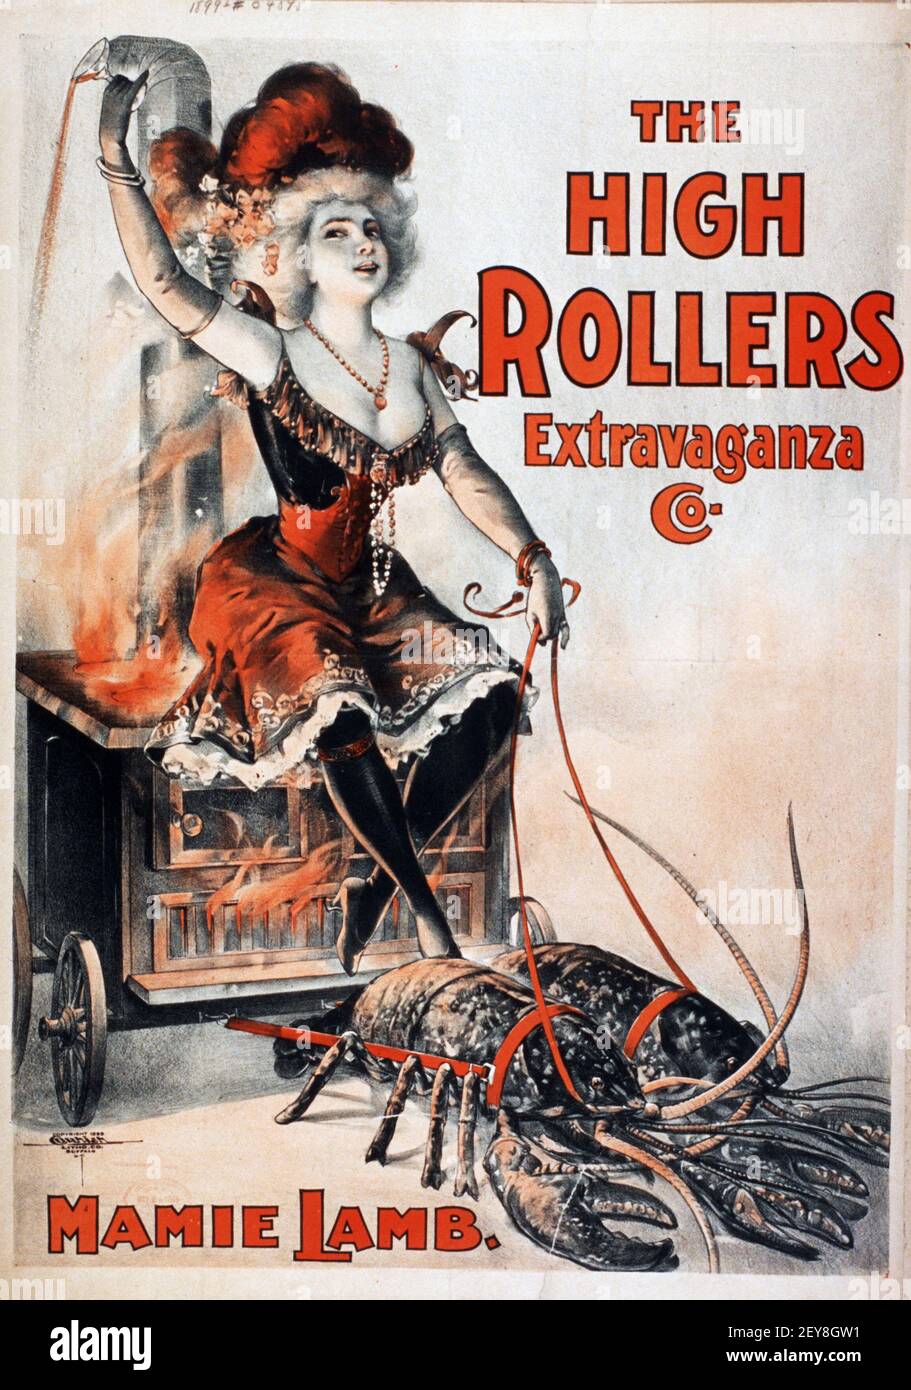 The High Rollers Extravaganza Poster. Mamie Lamb. Stockfoto